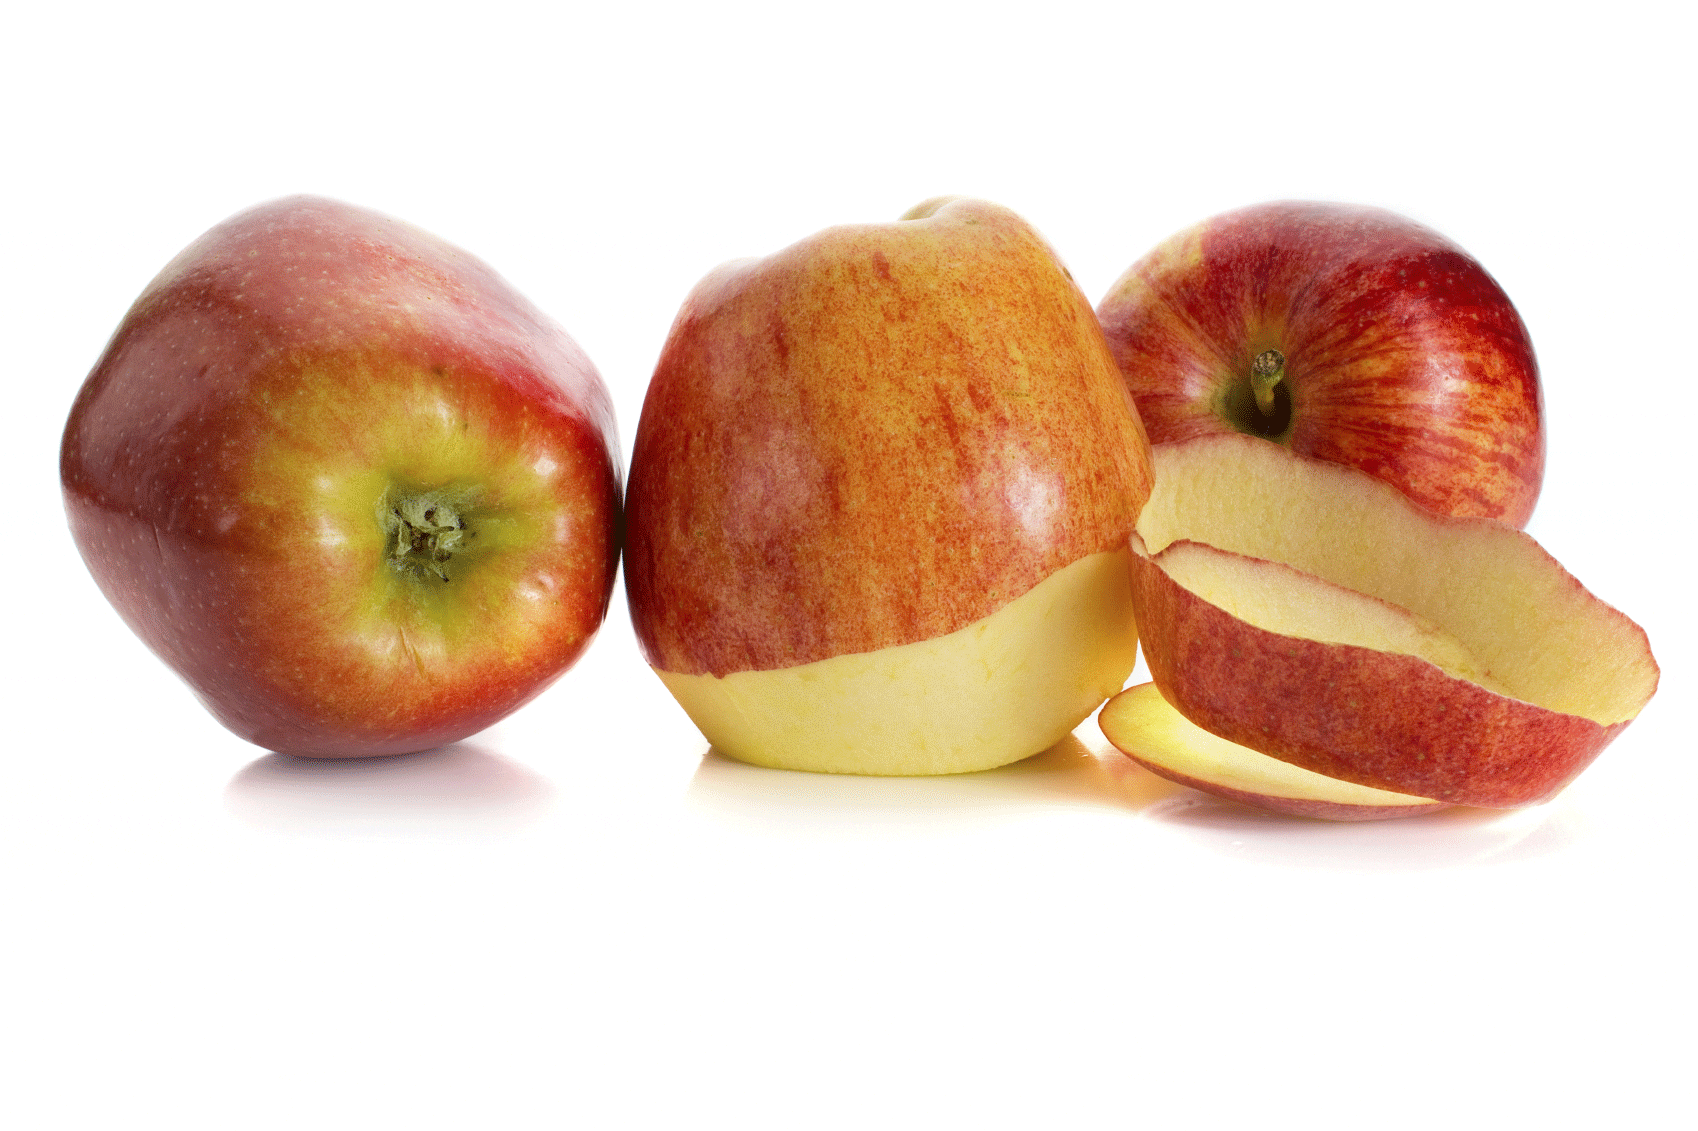 Apple Peel Powder Makes Use of a Longtime Waste Product